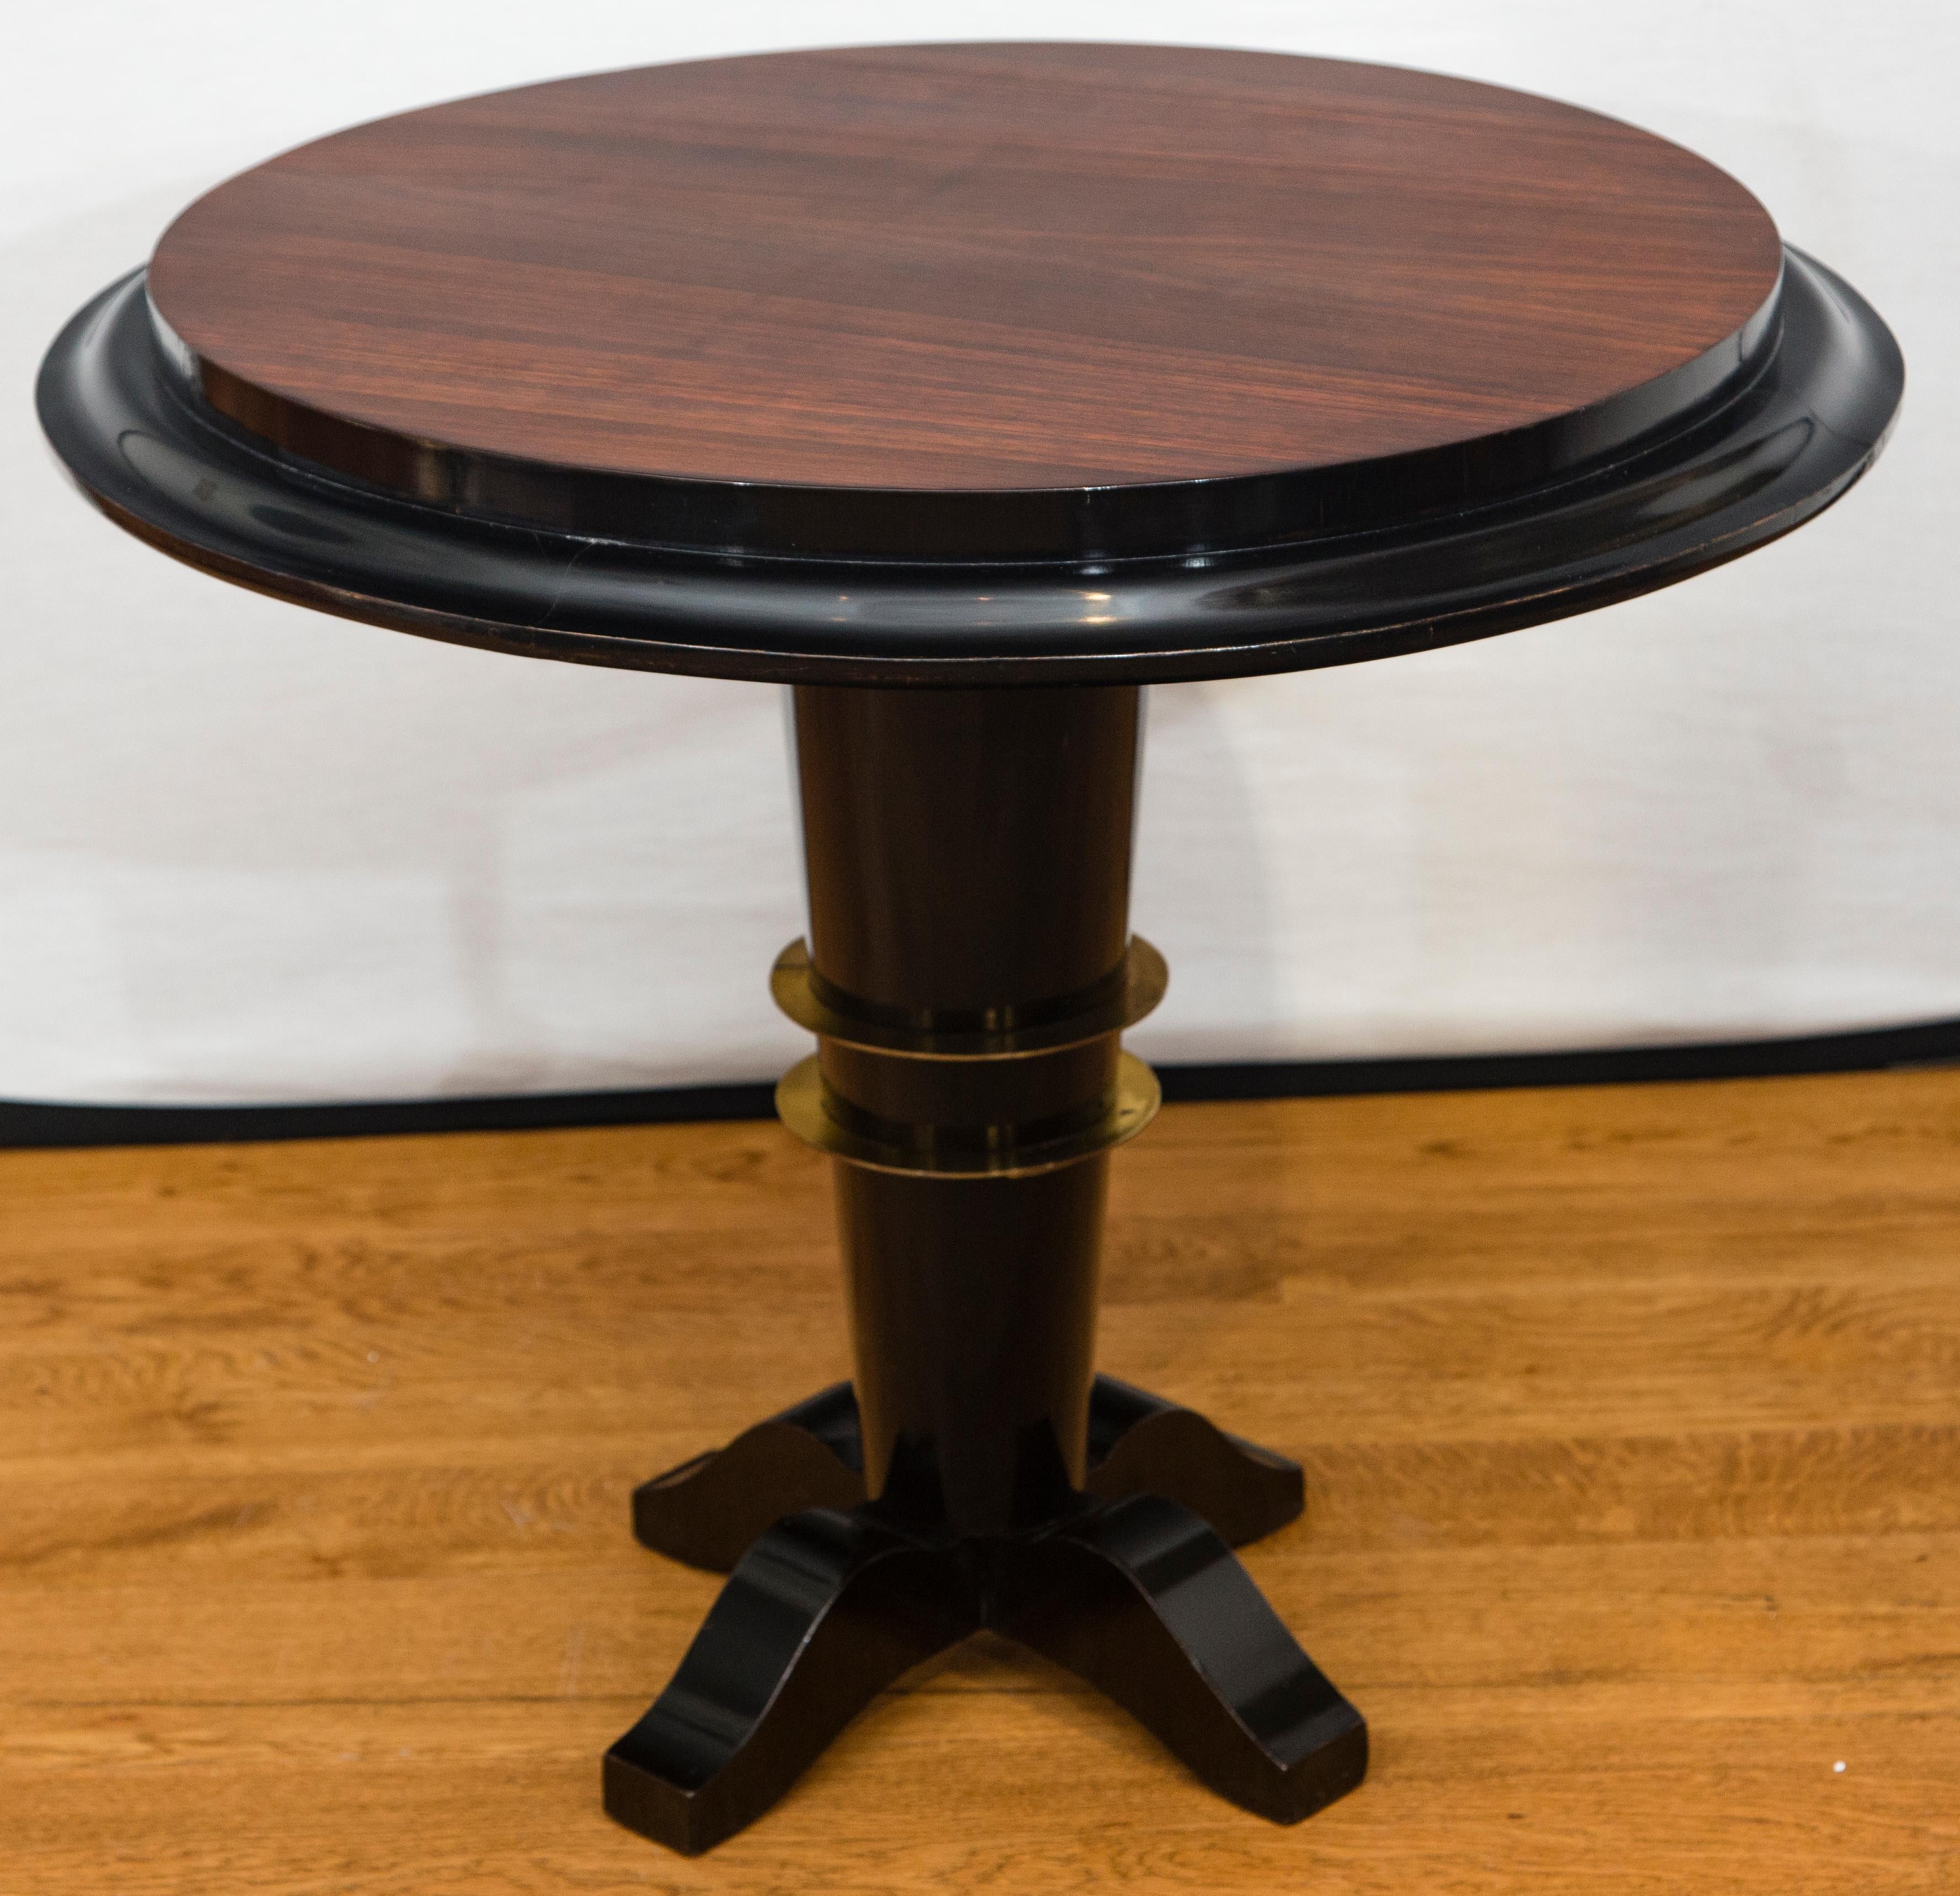 A prominent French Art Deco side table, circular raised plateau in palisander wood and black lacquer moulding rest above a tapered black lacquered column base with brass detailing
Dating: circa 1940
Origin: French
Condition: Excellent